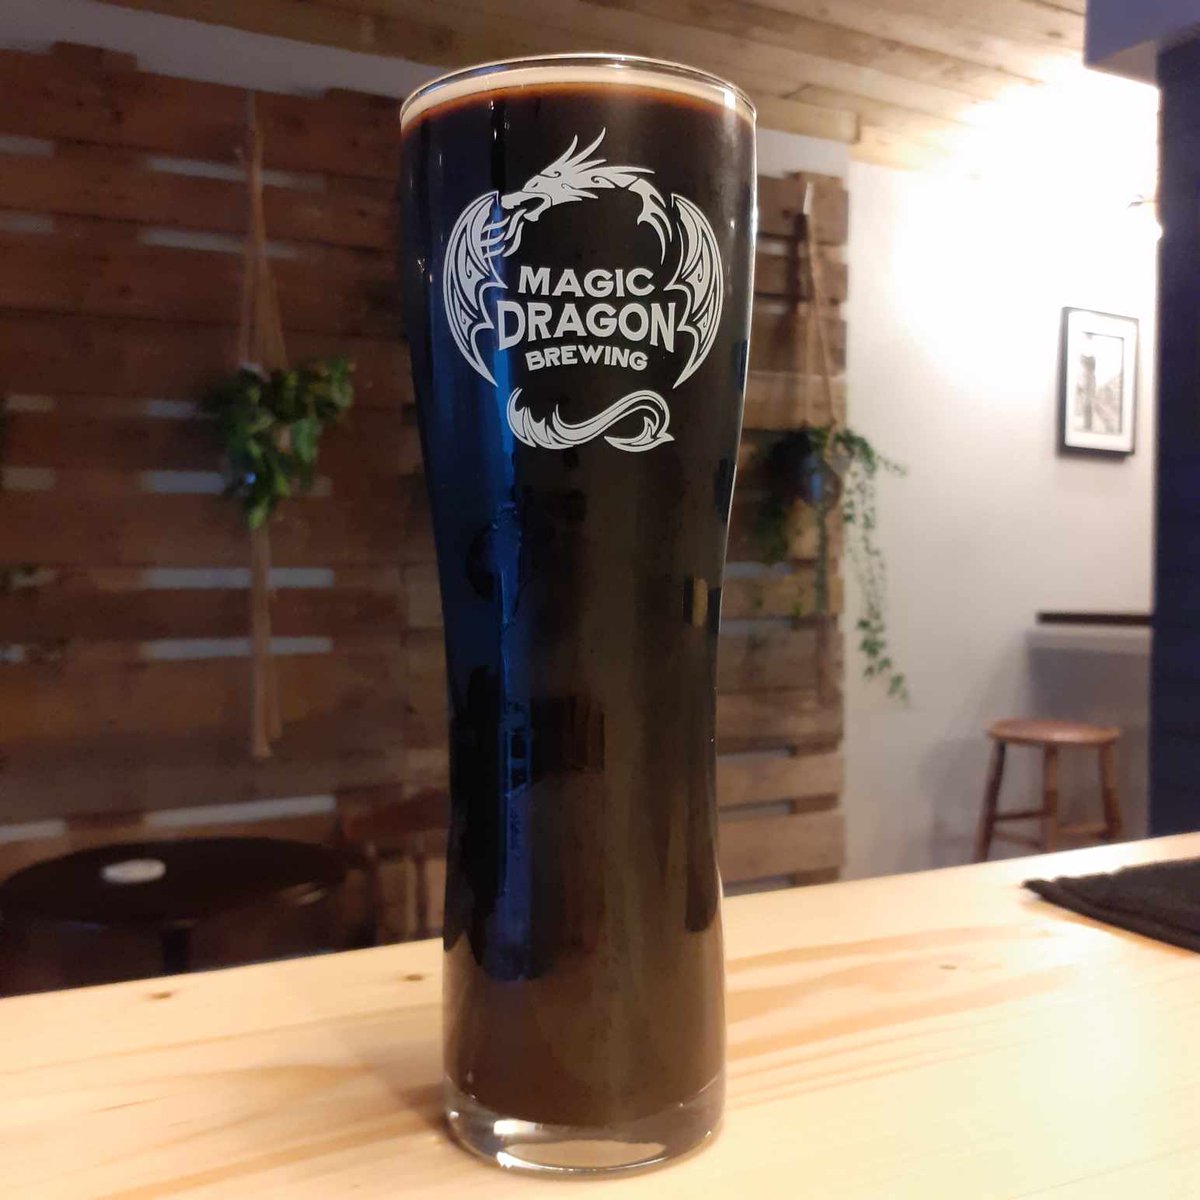 Black Tiger IPA 4.8% abv now pouring in our bar, The Crafty Dragon Whitchurch, Shropshire😋 #magicdragonbrewing #craftbeeruk #blackipa #whitchurch #shropshire #visitshrophire